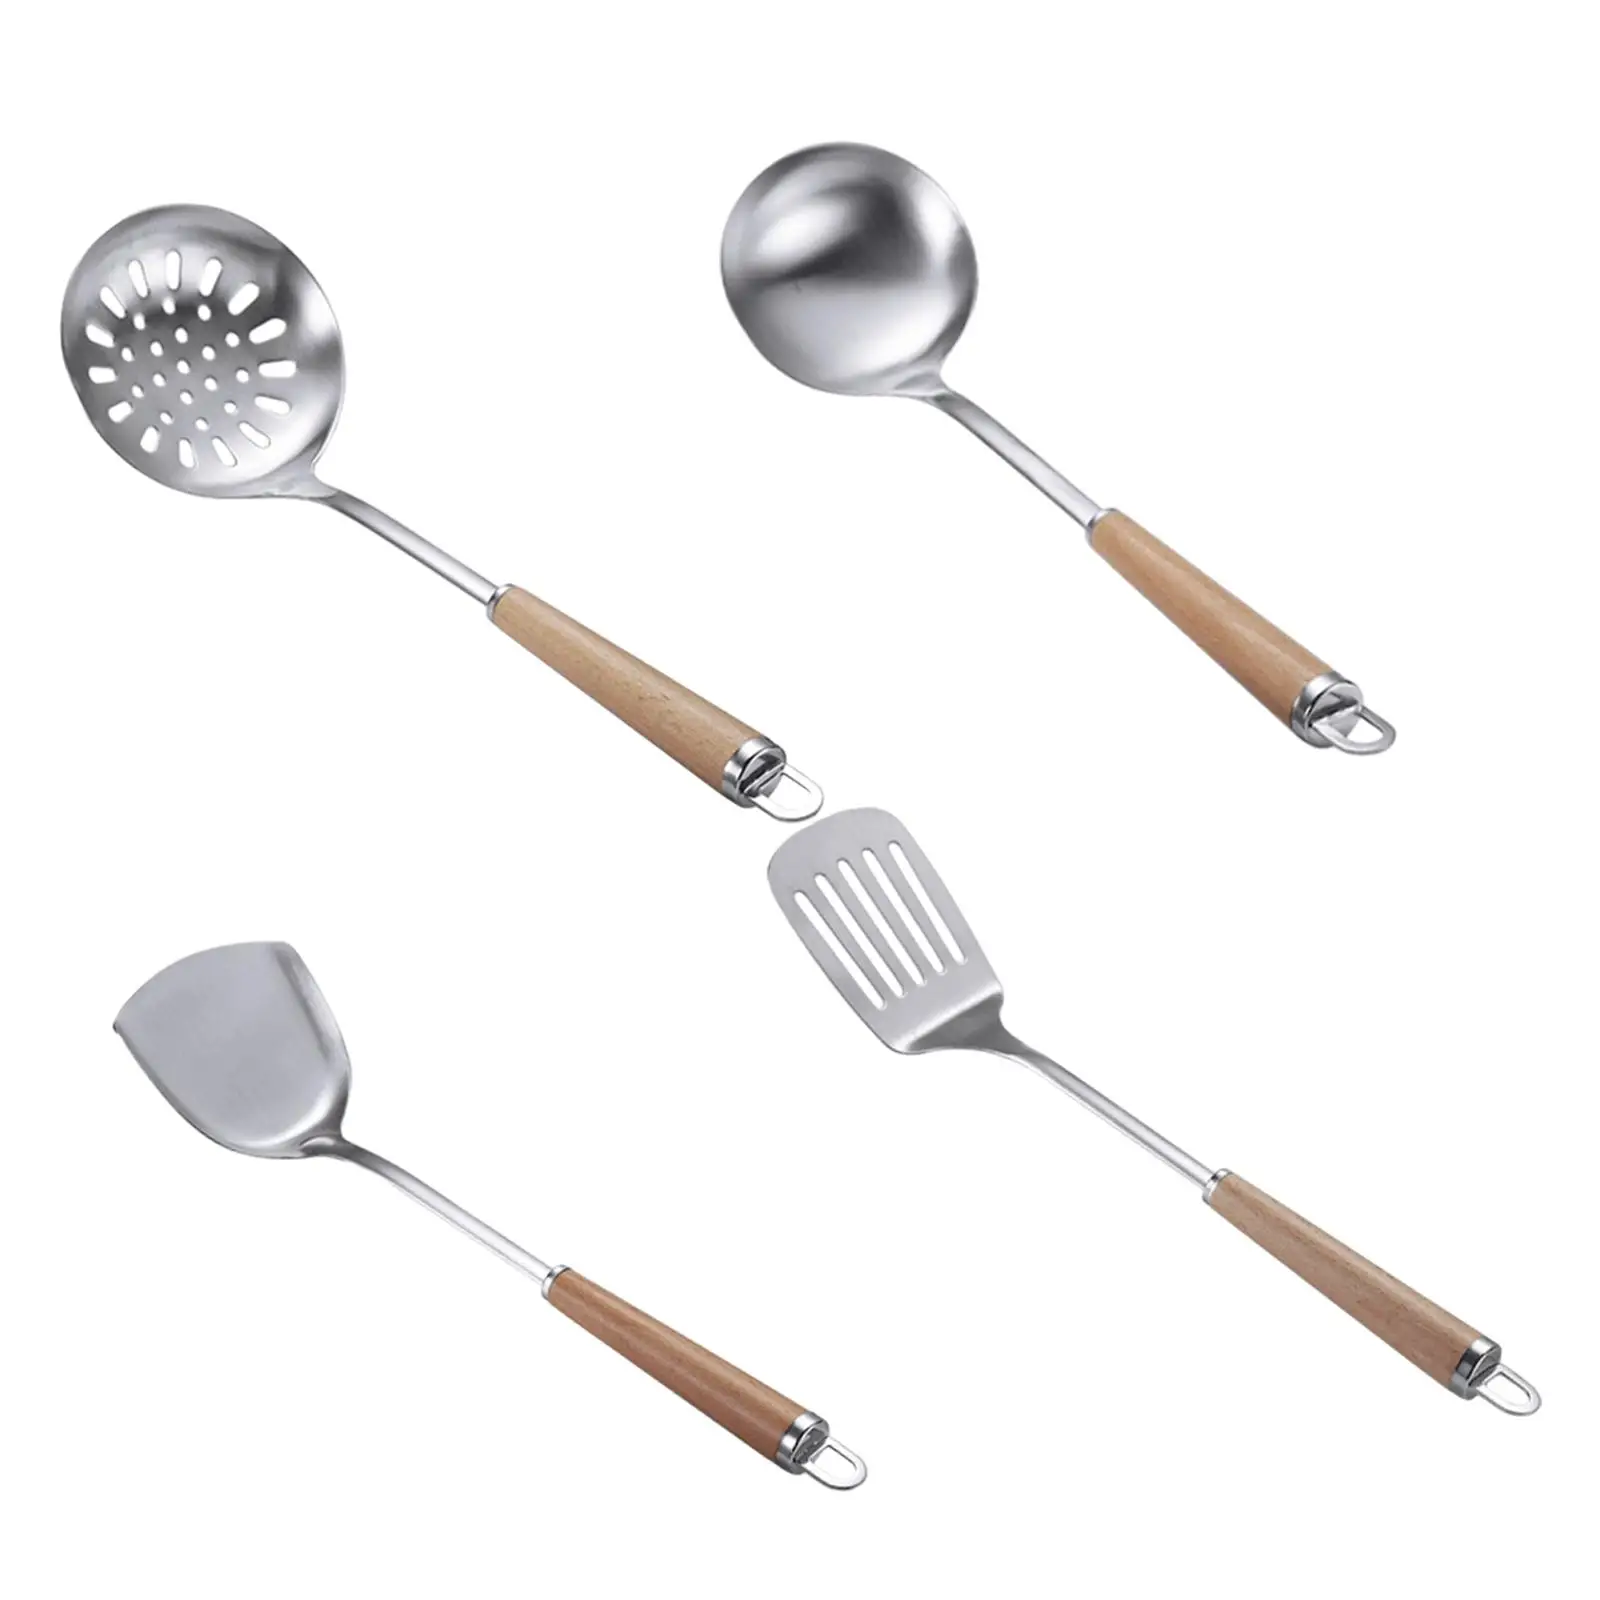 Stainless Steel Cooking Utensils Convenient Multifunctional Kitchen Gadgets for Cooking Restaurant Picnic Kitchen Camping